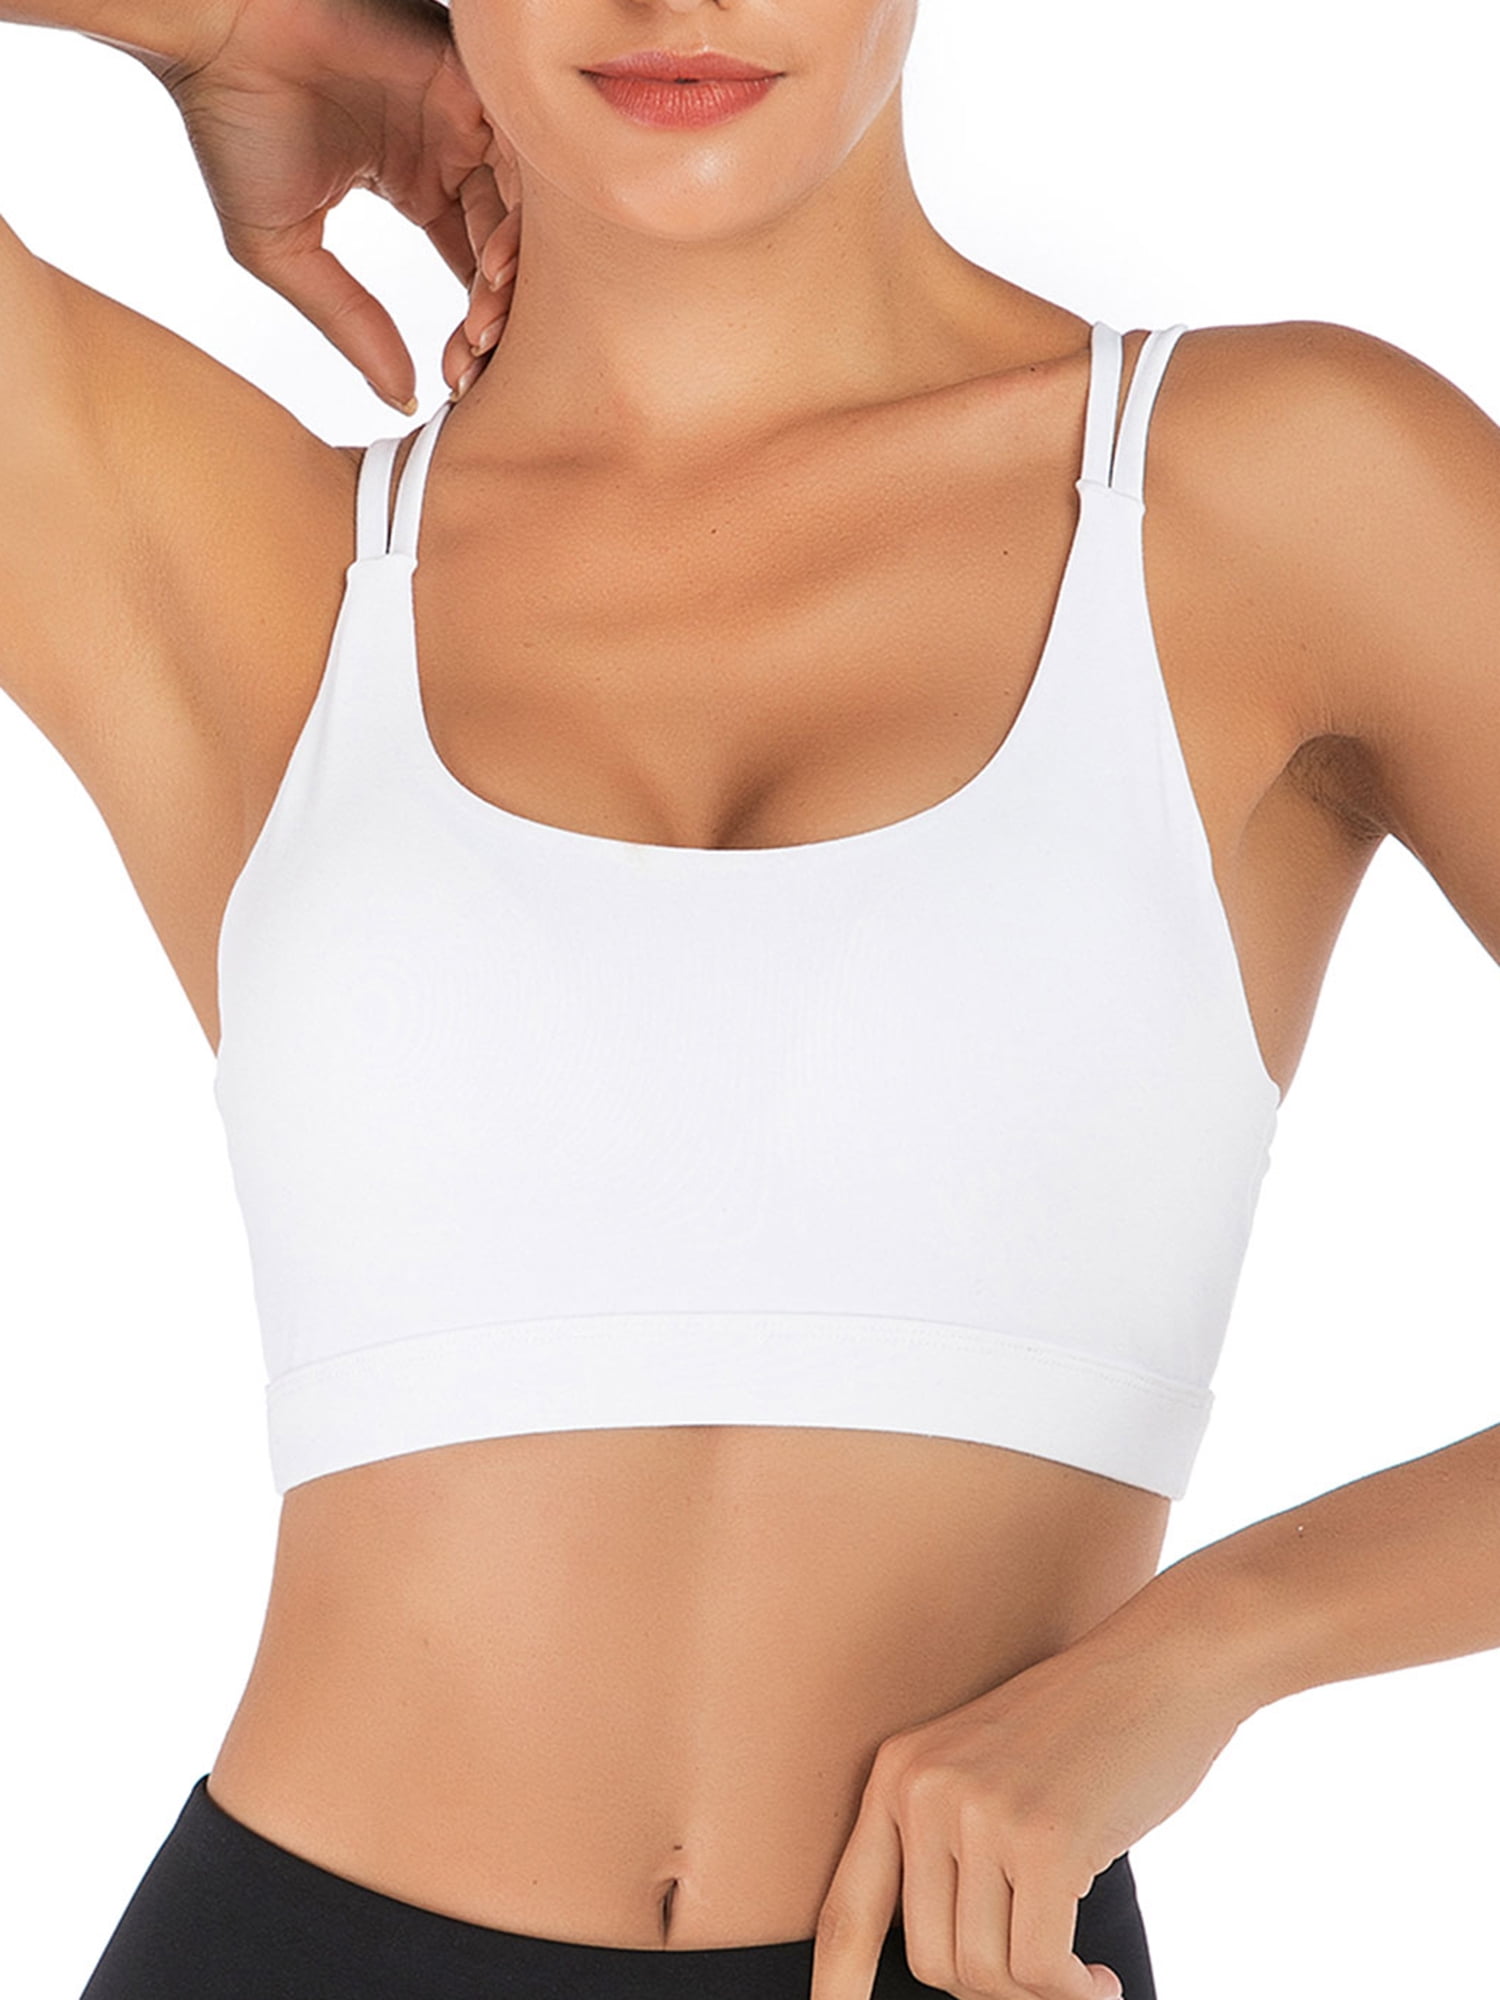 Junlan Womens Sports Bra Pullover Open-Back with Adjustable Straps Support for Active Yoga 